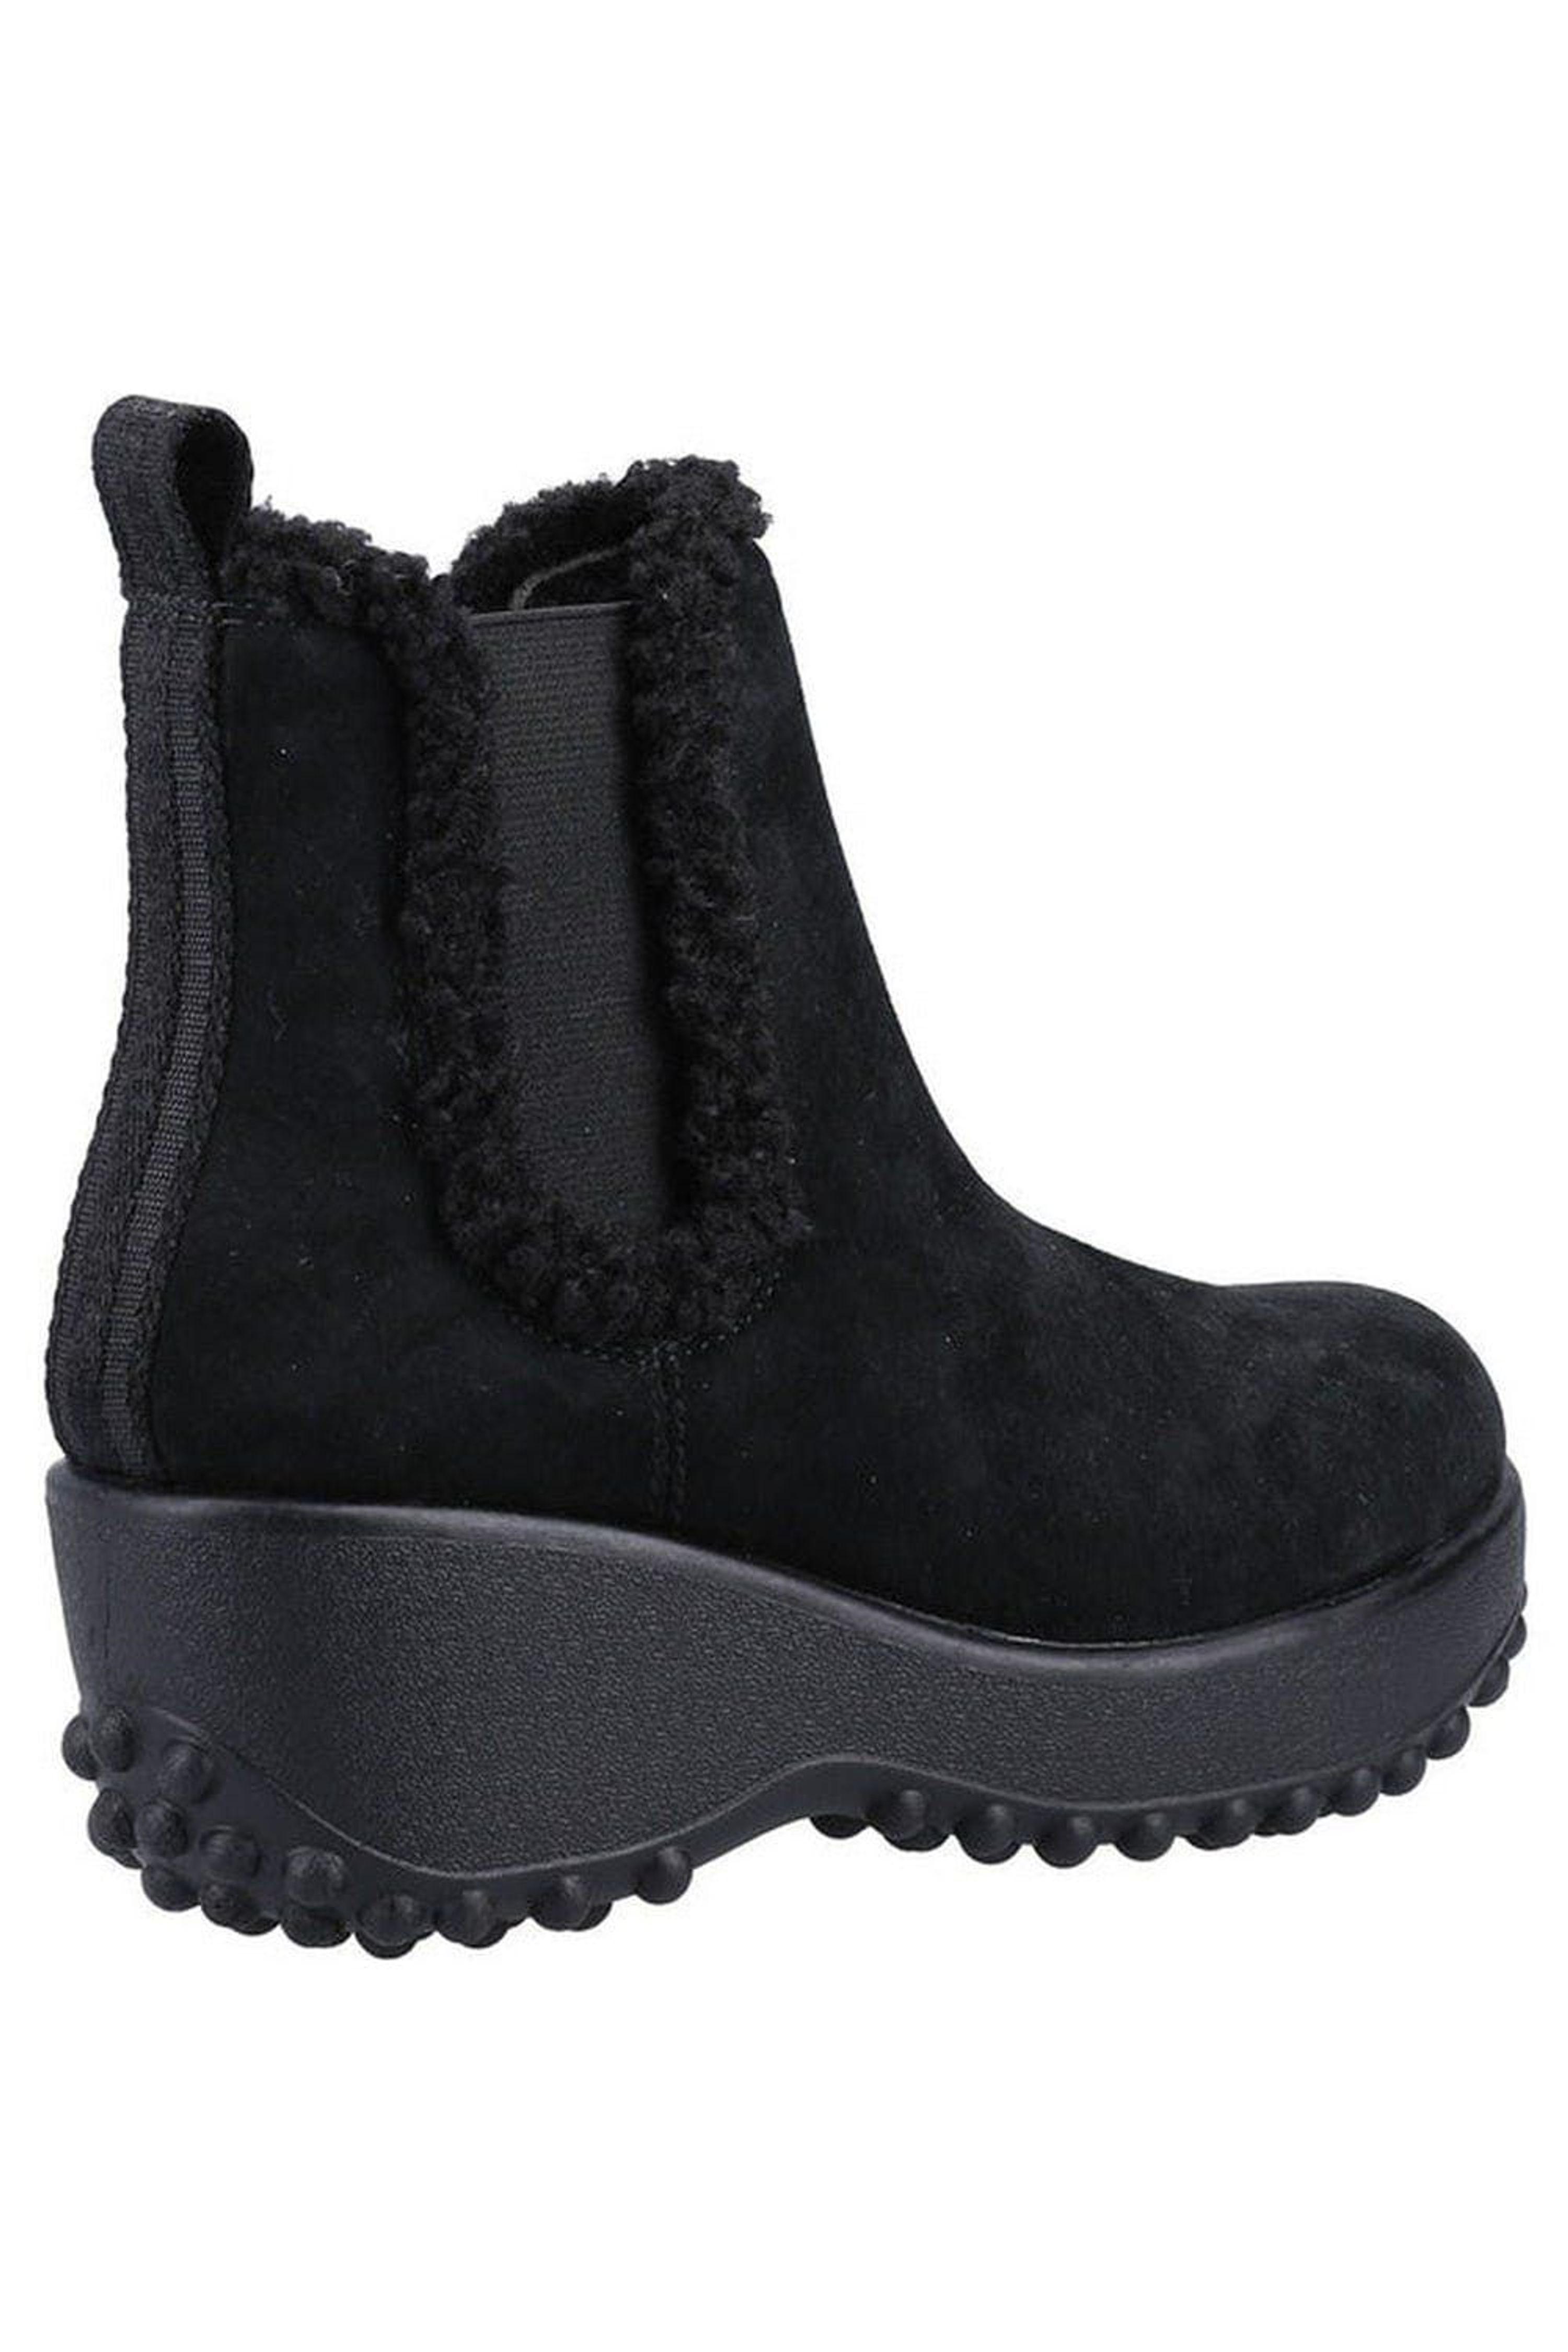 Rocket Dog Frost Suede Ankle Boots in Black | Lyst